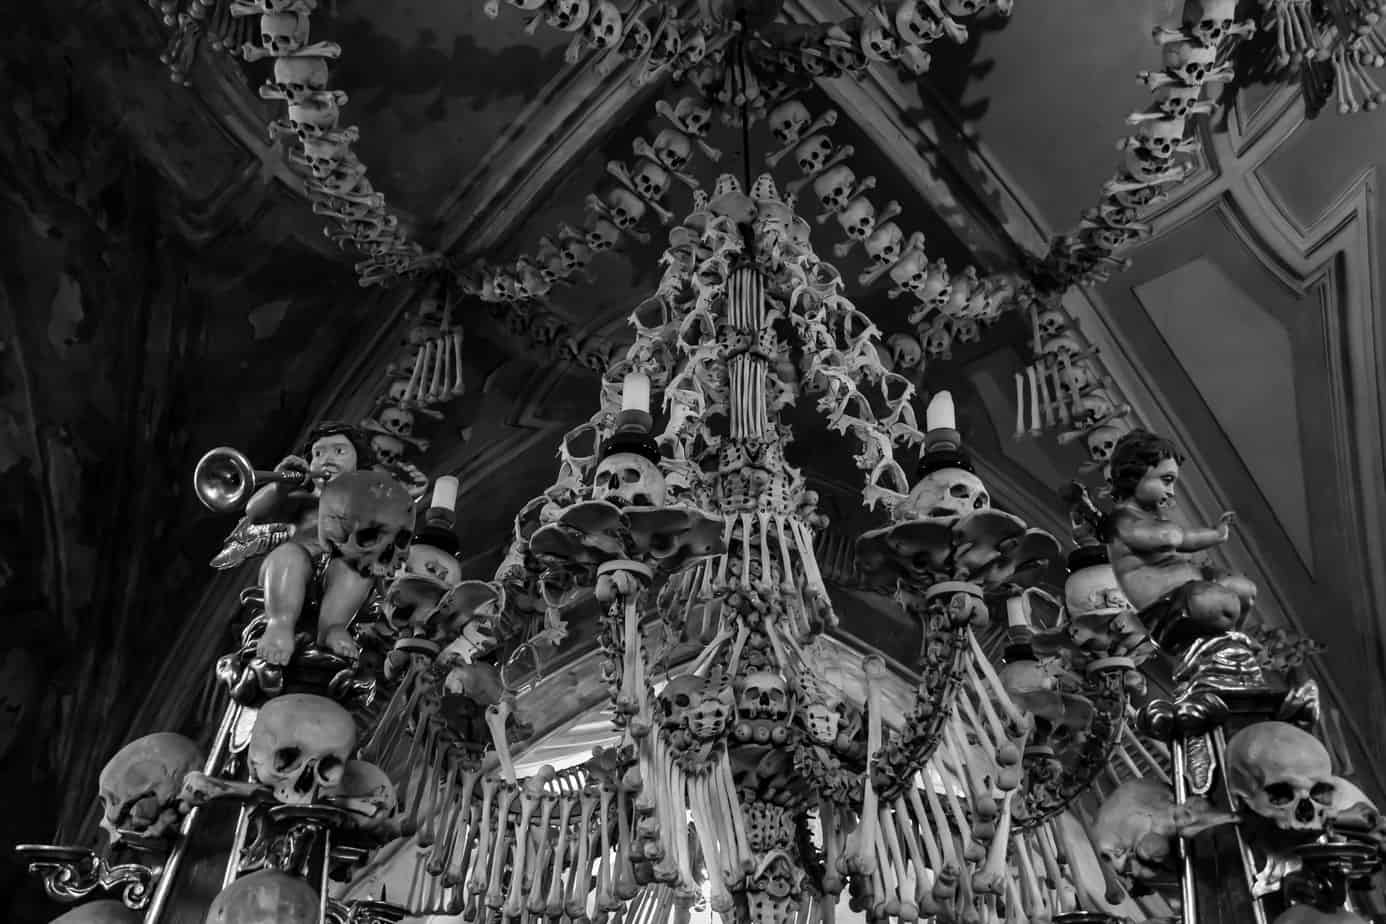 Skeletons and bones laid out intricately from the ceiling.